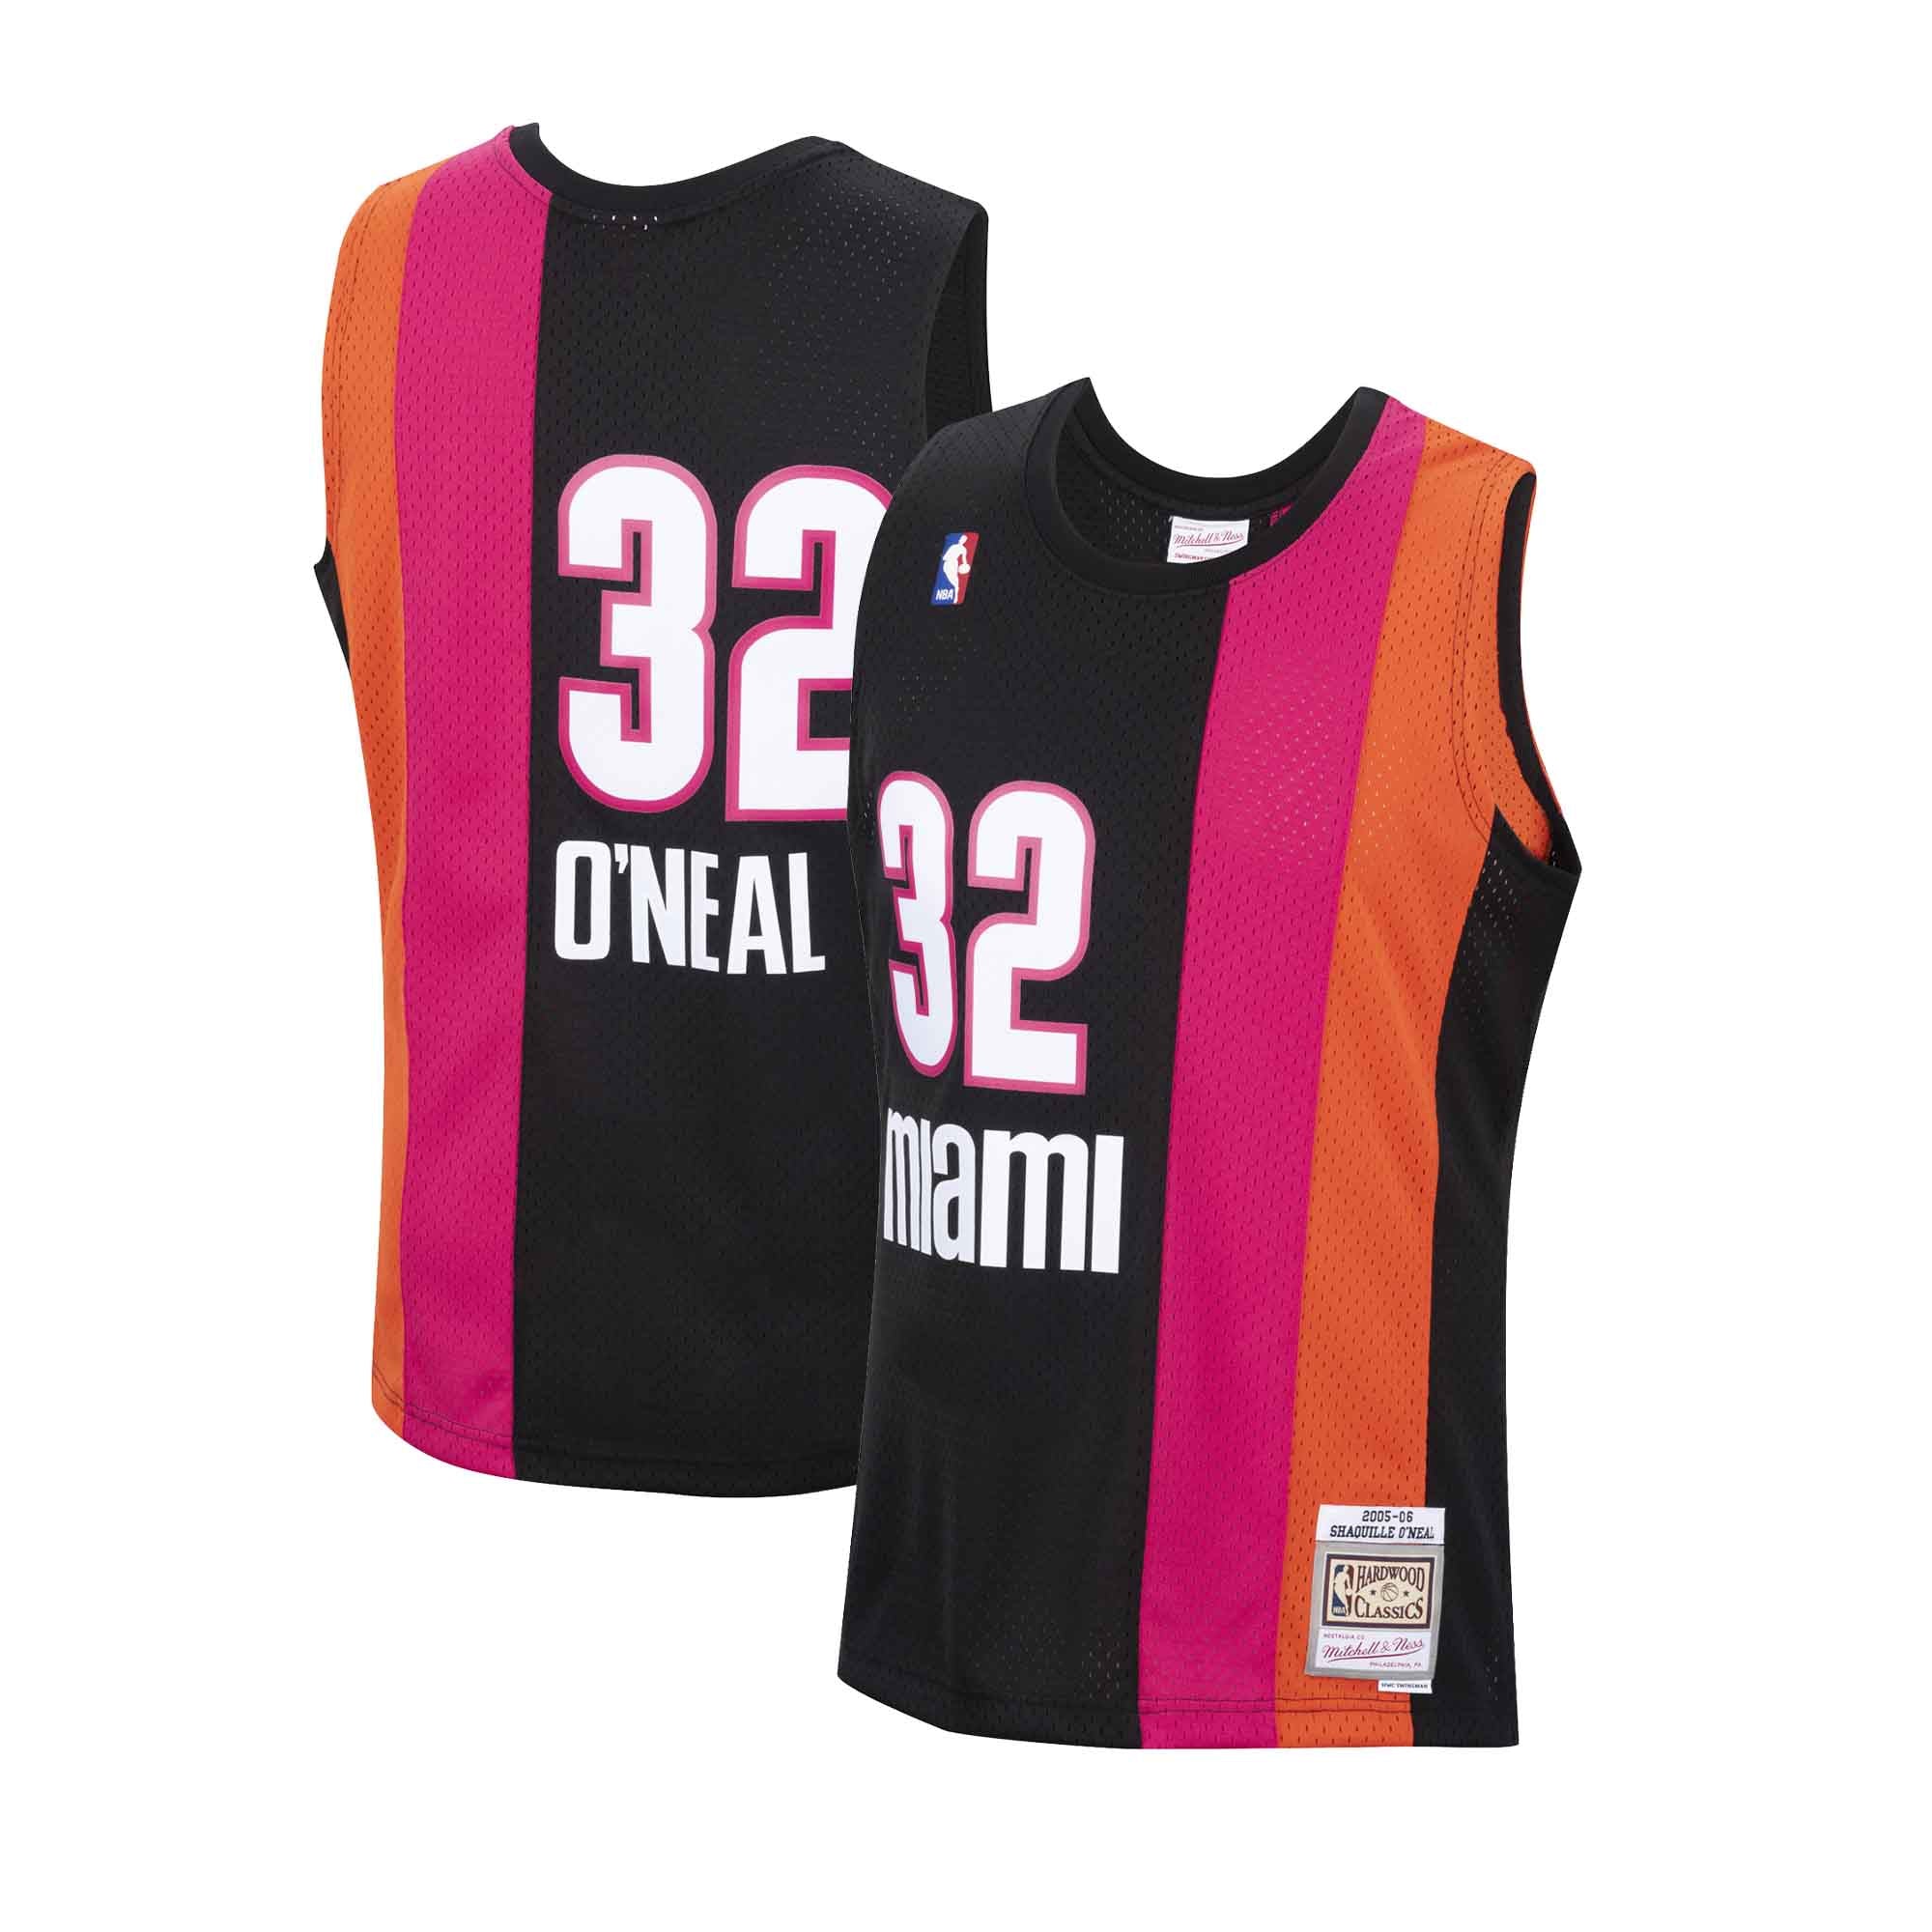  Shaquille O'Neal Miami Heat Swingman Throwback 2005-2006  Replica Jersey (Small) Black : Sports & Outdoors